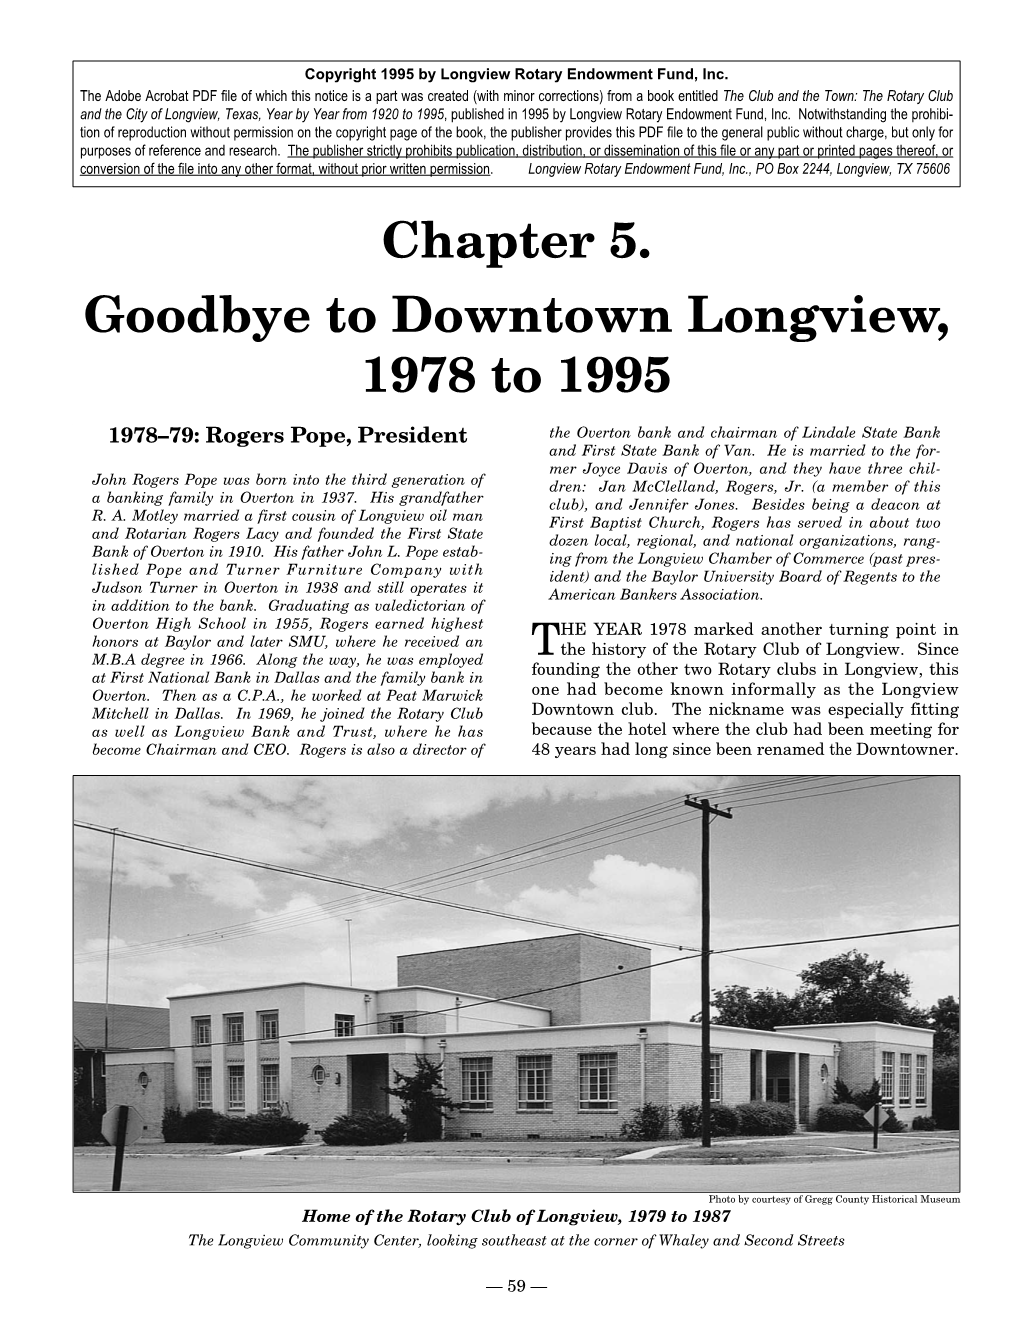 Chapter 5. Goodbye to Downtown Longview, 1978 to 1995